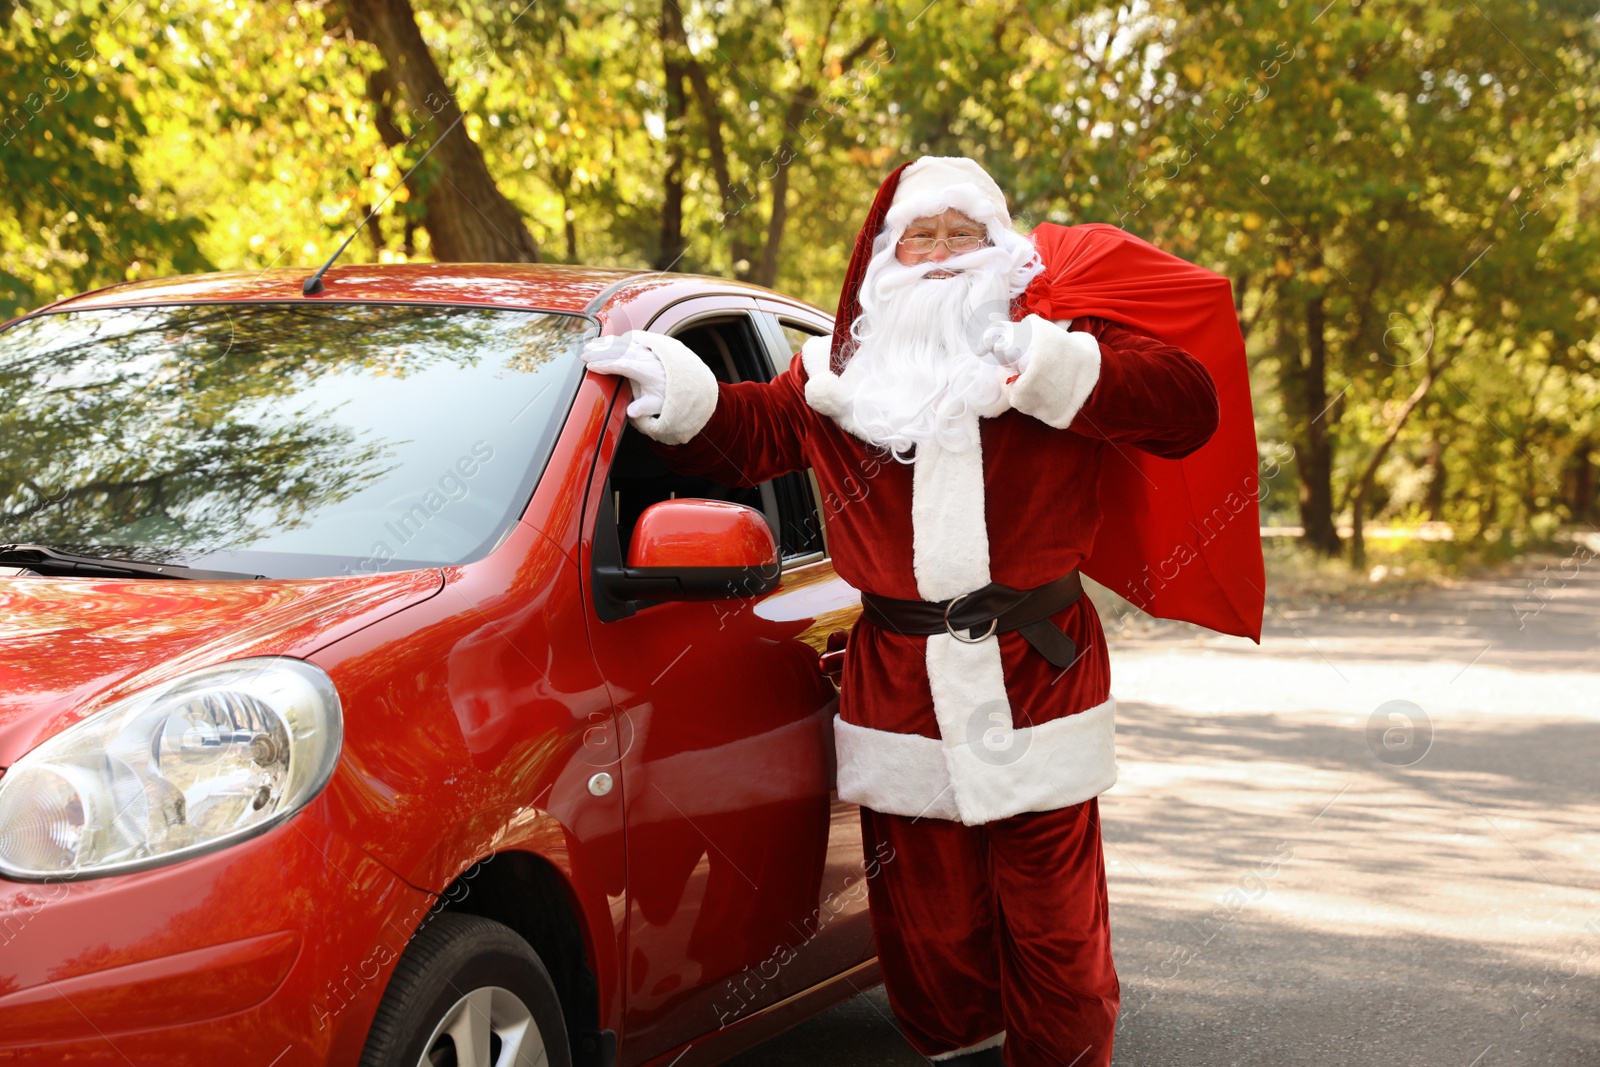 Photo of Authentic Santa Claus with bag full of presents near car outdoors